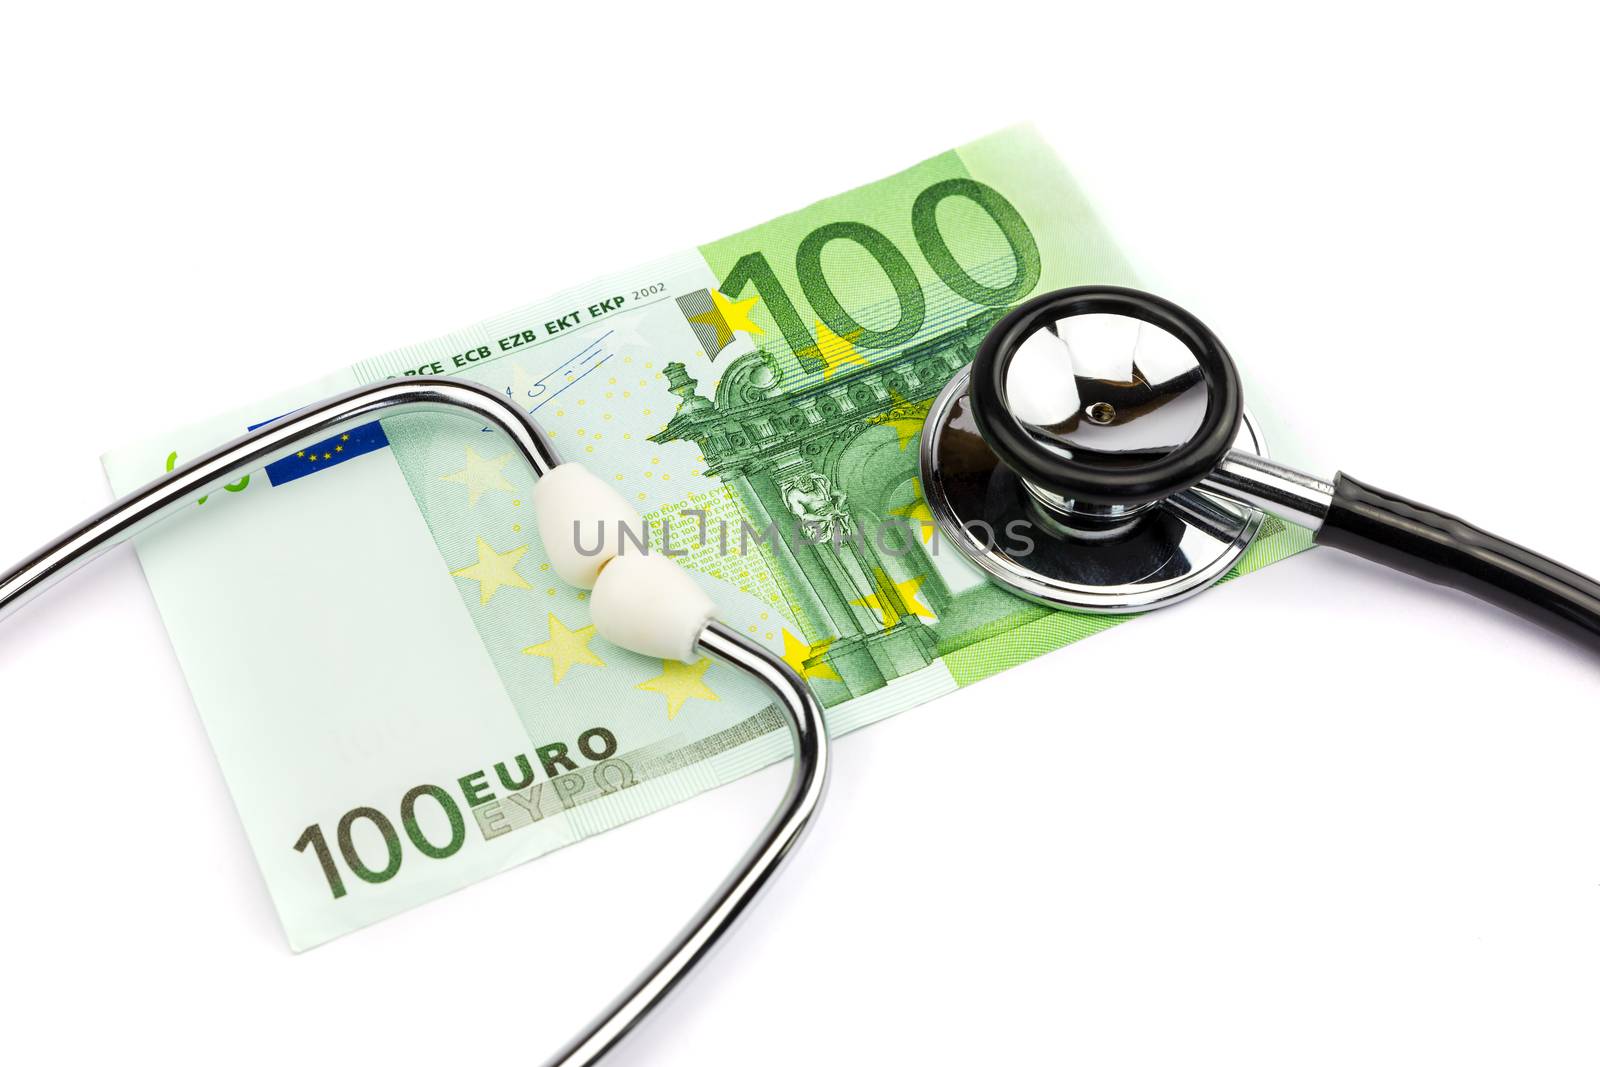 Hundred euro note with professional stethoscope on white backgro by BenSchonewille